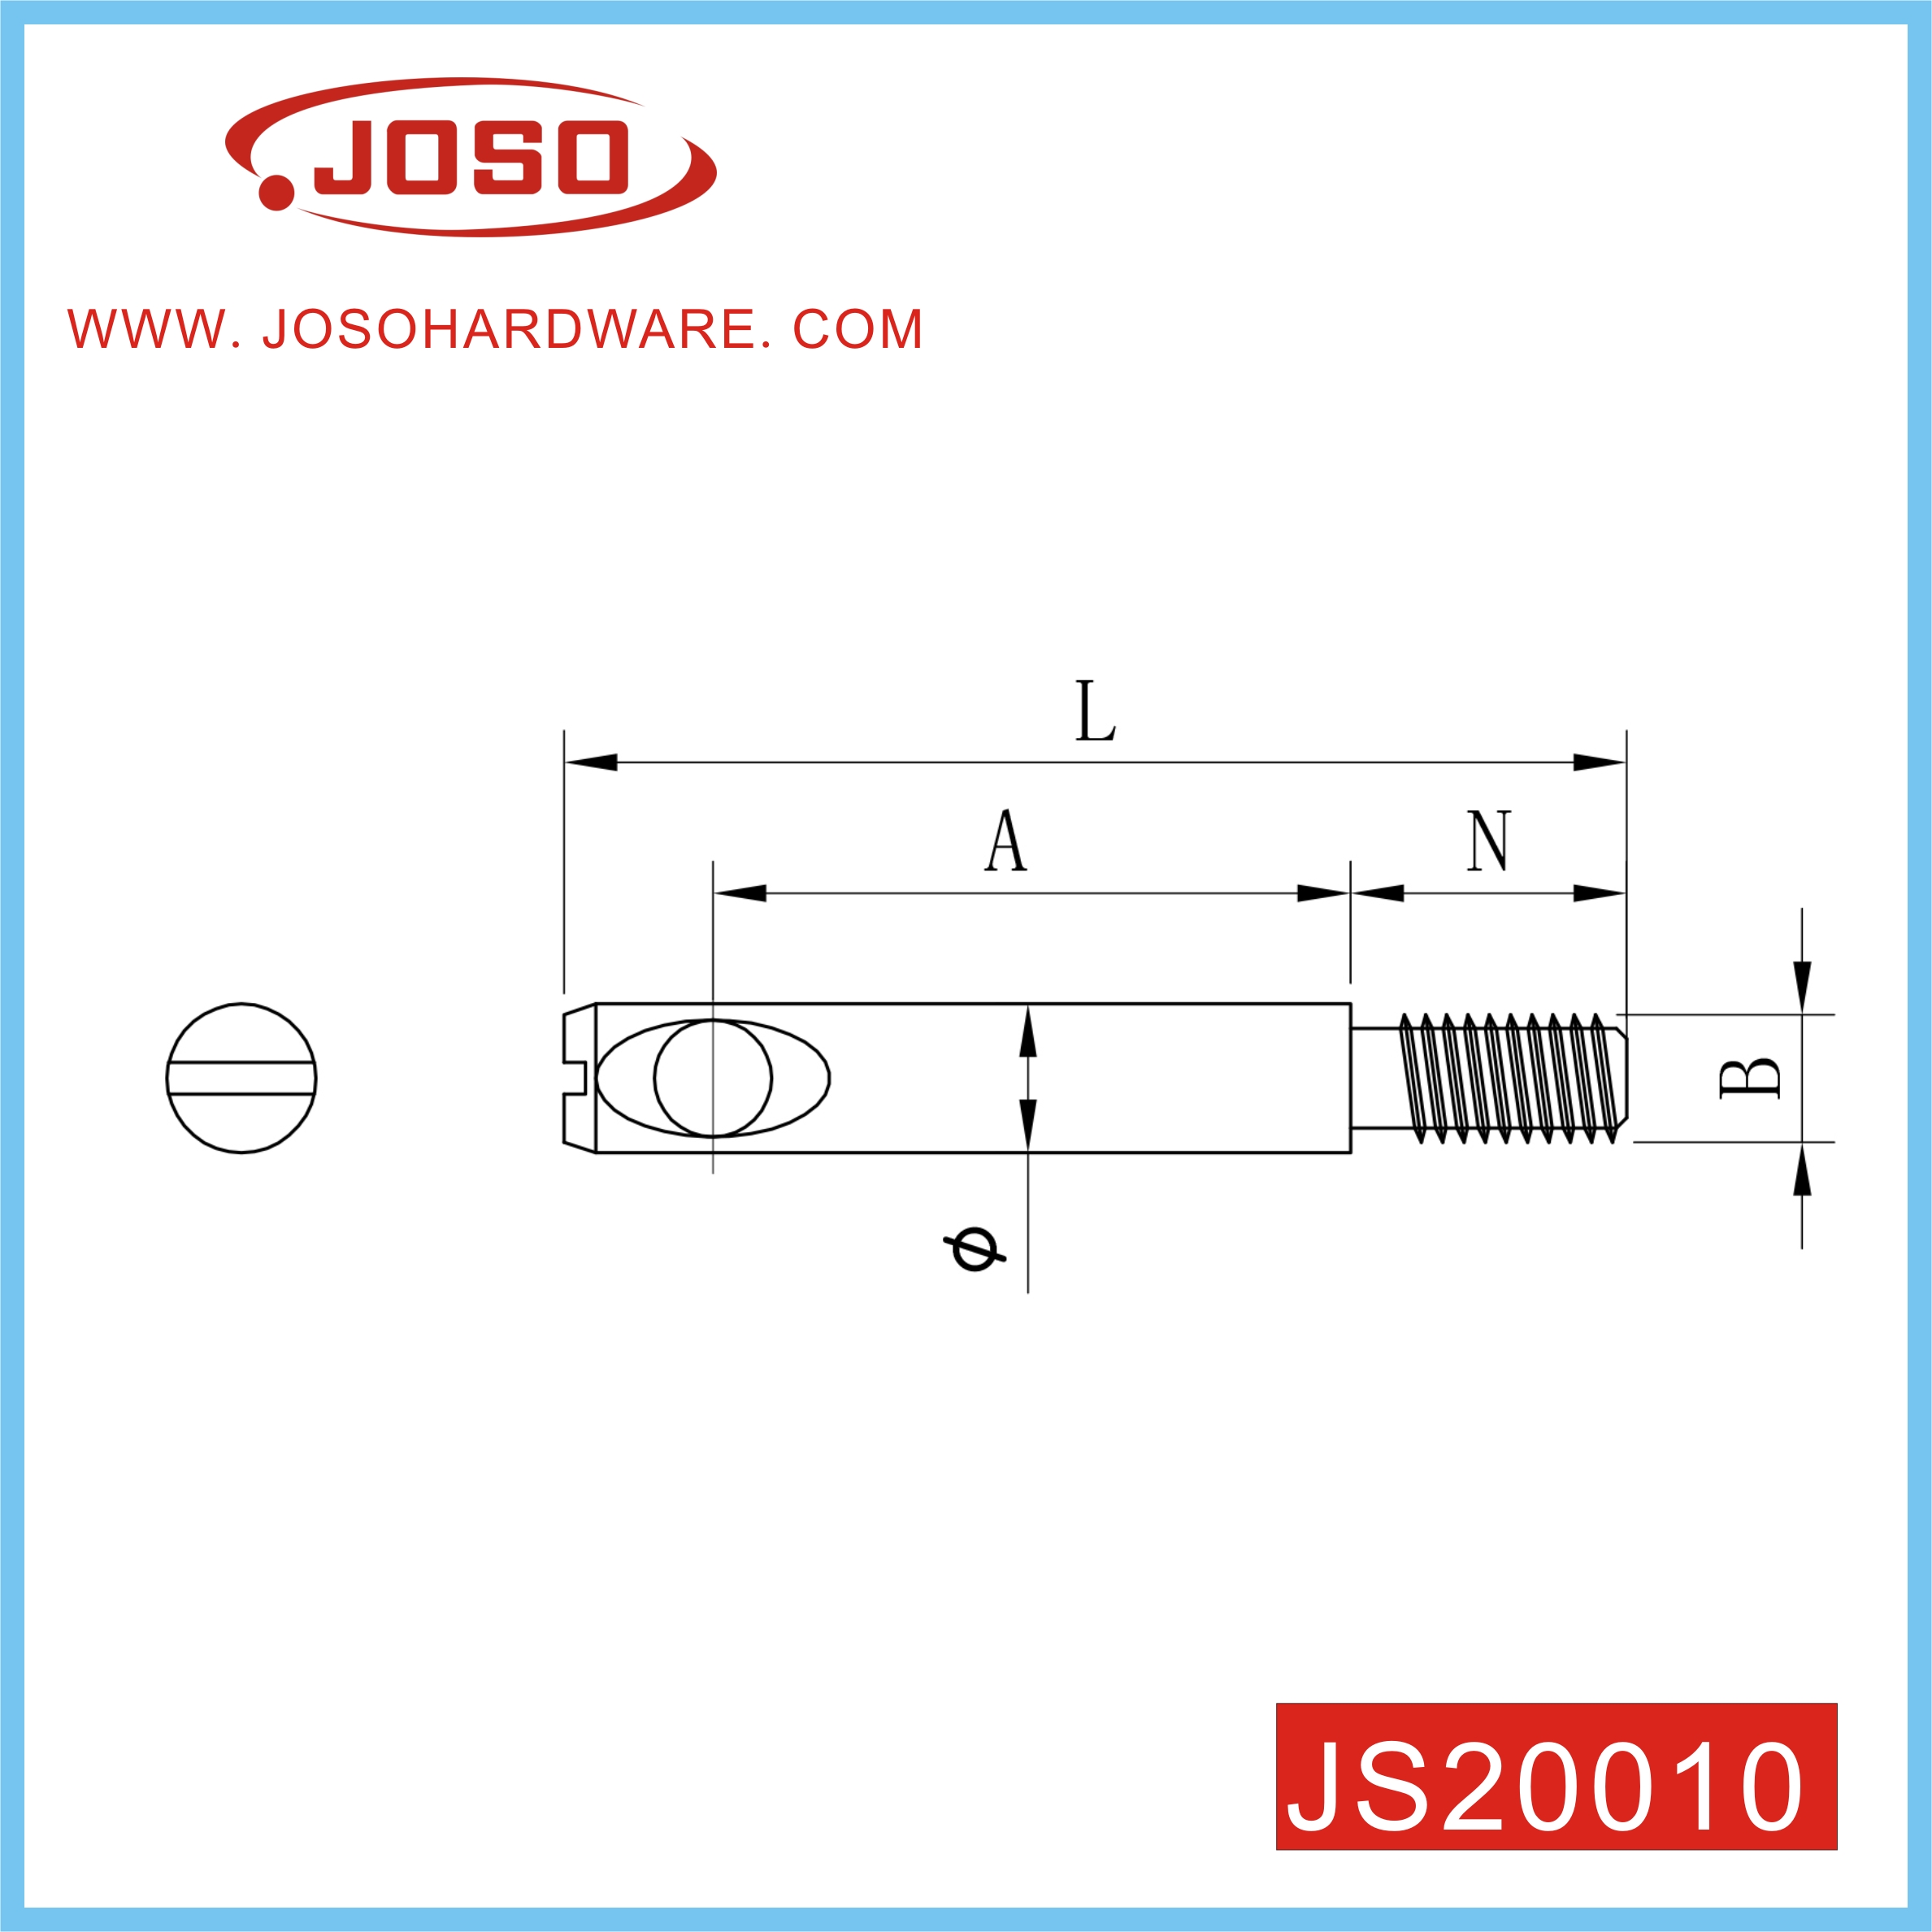 Steel Flat Shaft Of Hardware Accessories For Furniture